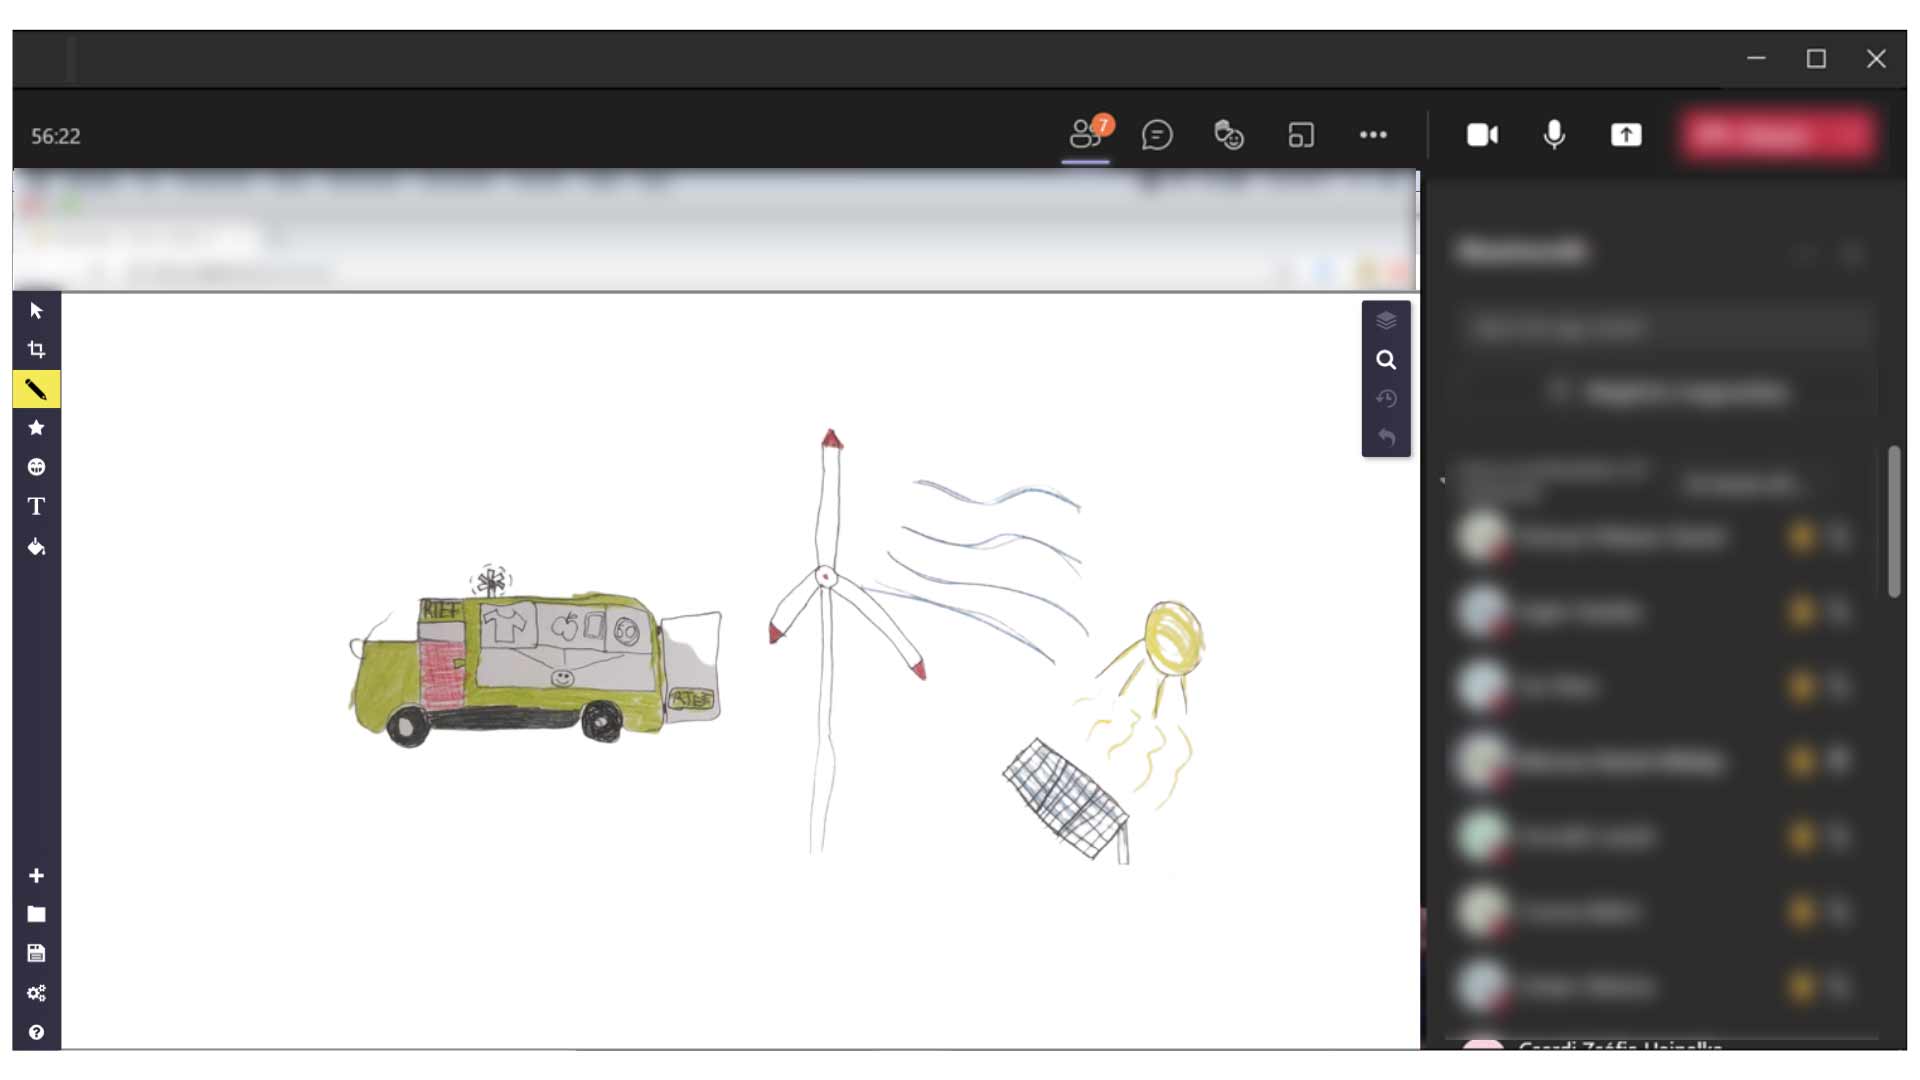 In addition to the blurred user interface of the software, the following three drawings are arranged on the drawing sheet: Left, a yellow vehicle with a red door, on which a T-shirt, an apple, a smiley and other unclear elements are drawn. Middle, a wind turbine, with wind lines coming from the right. Right, a yellow sun, with yellow heat lines streaming towards the solar panels outlined below. 